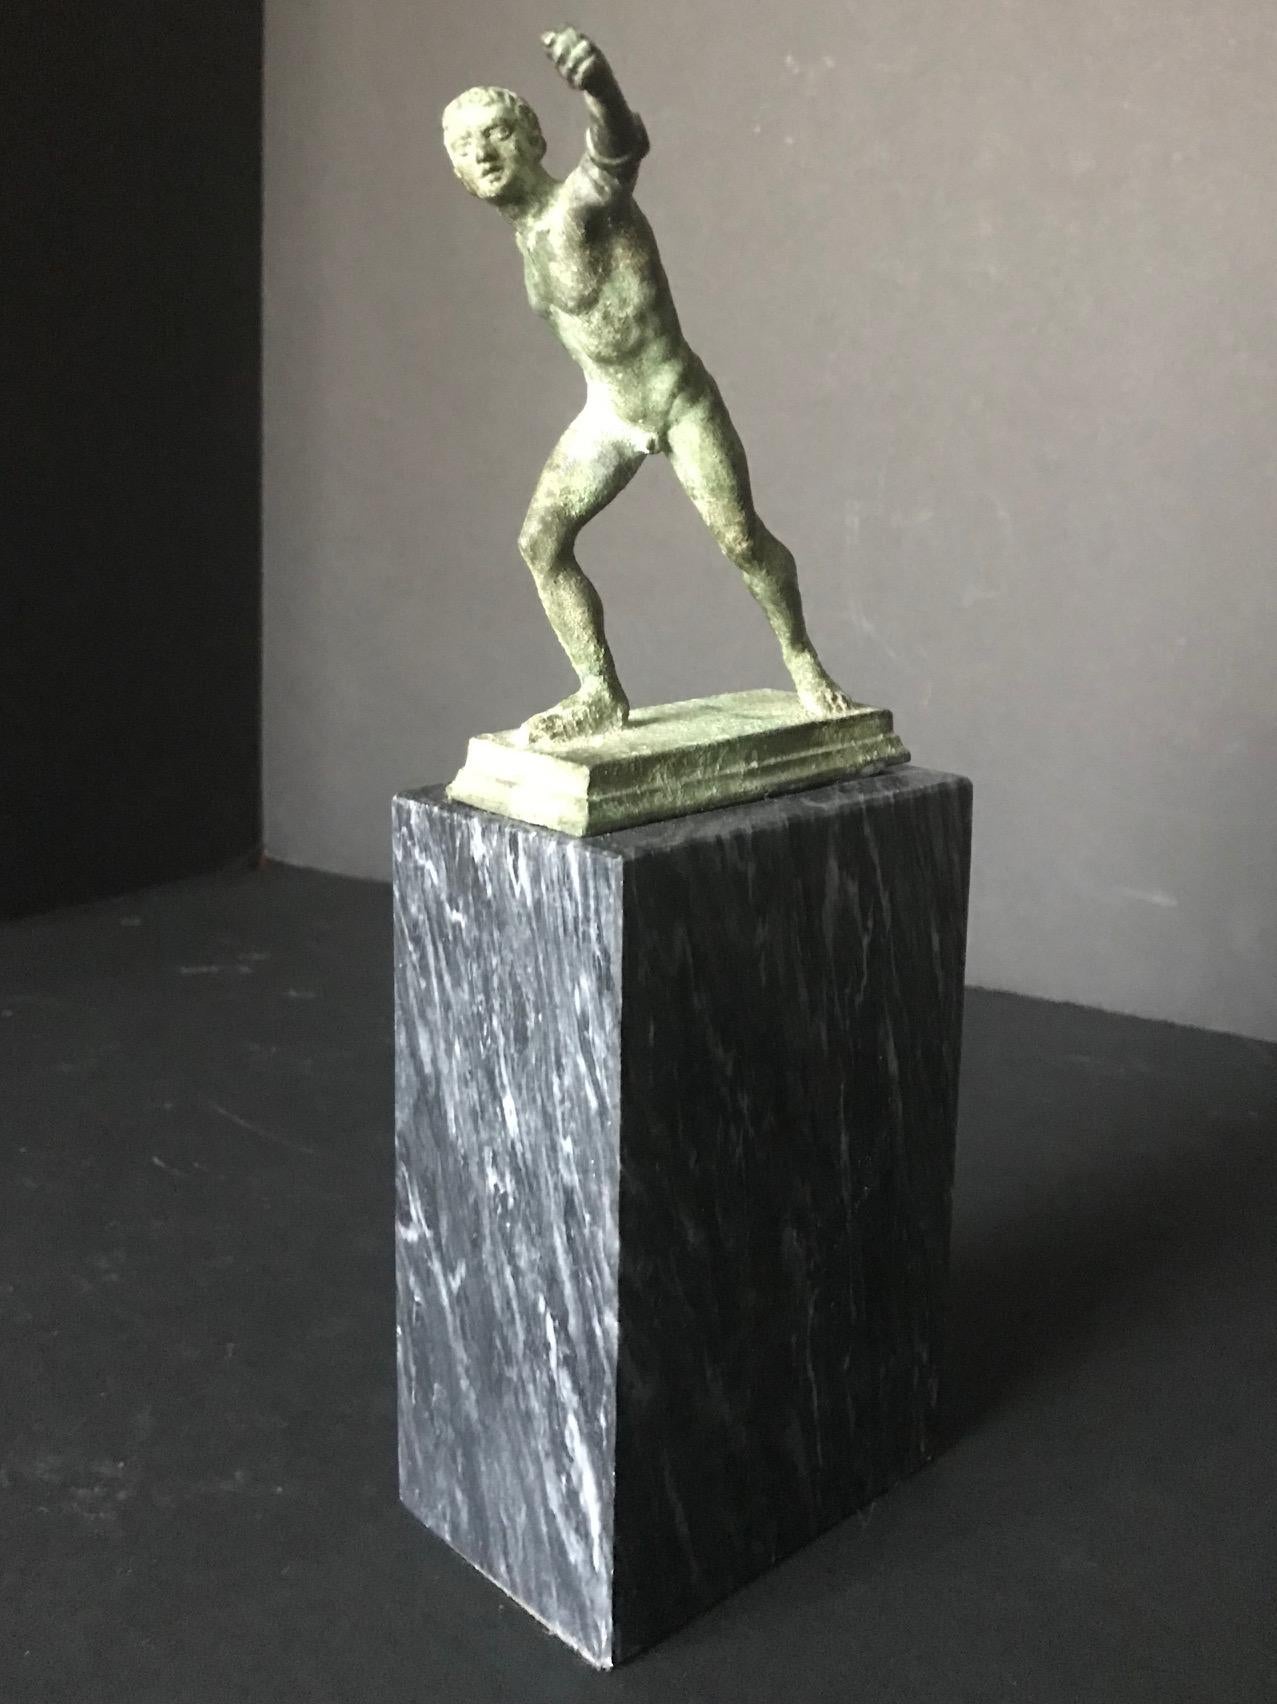 Marble 19th Century Grand Tour Borghese Gladiator Bronze Figure after the Antique